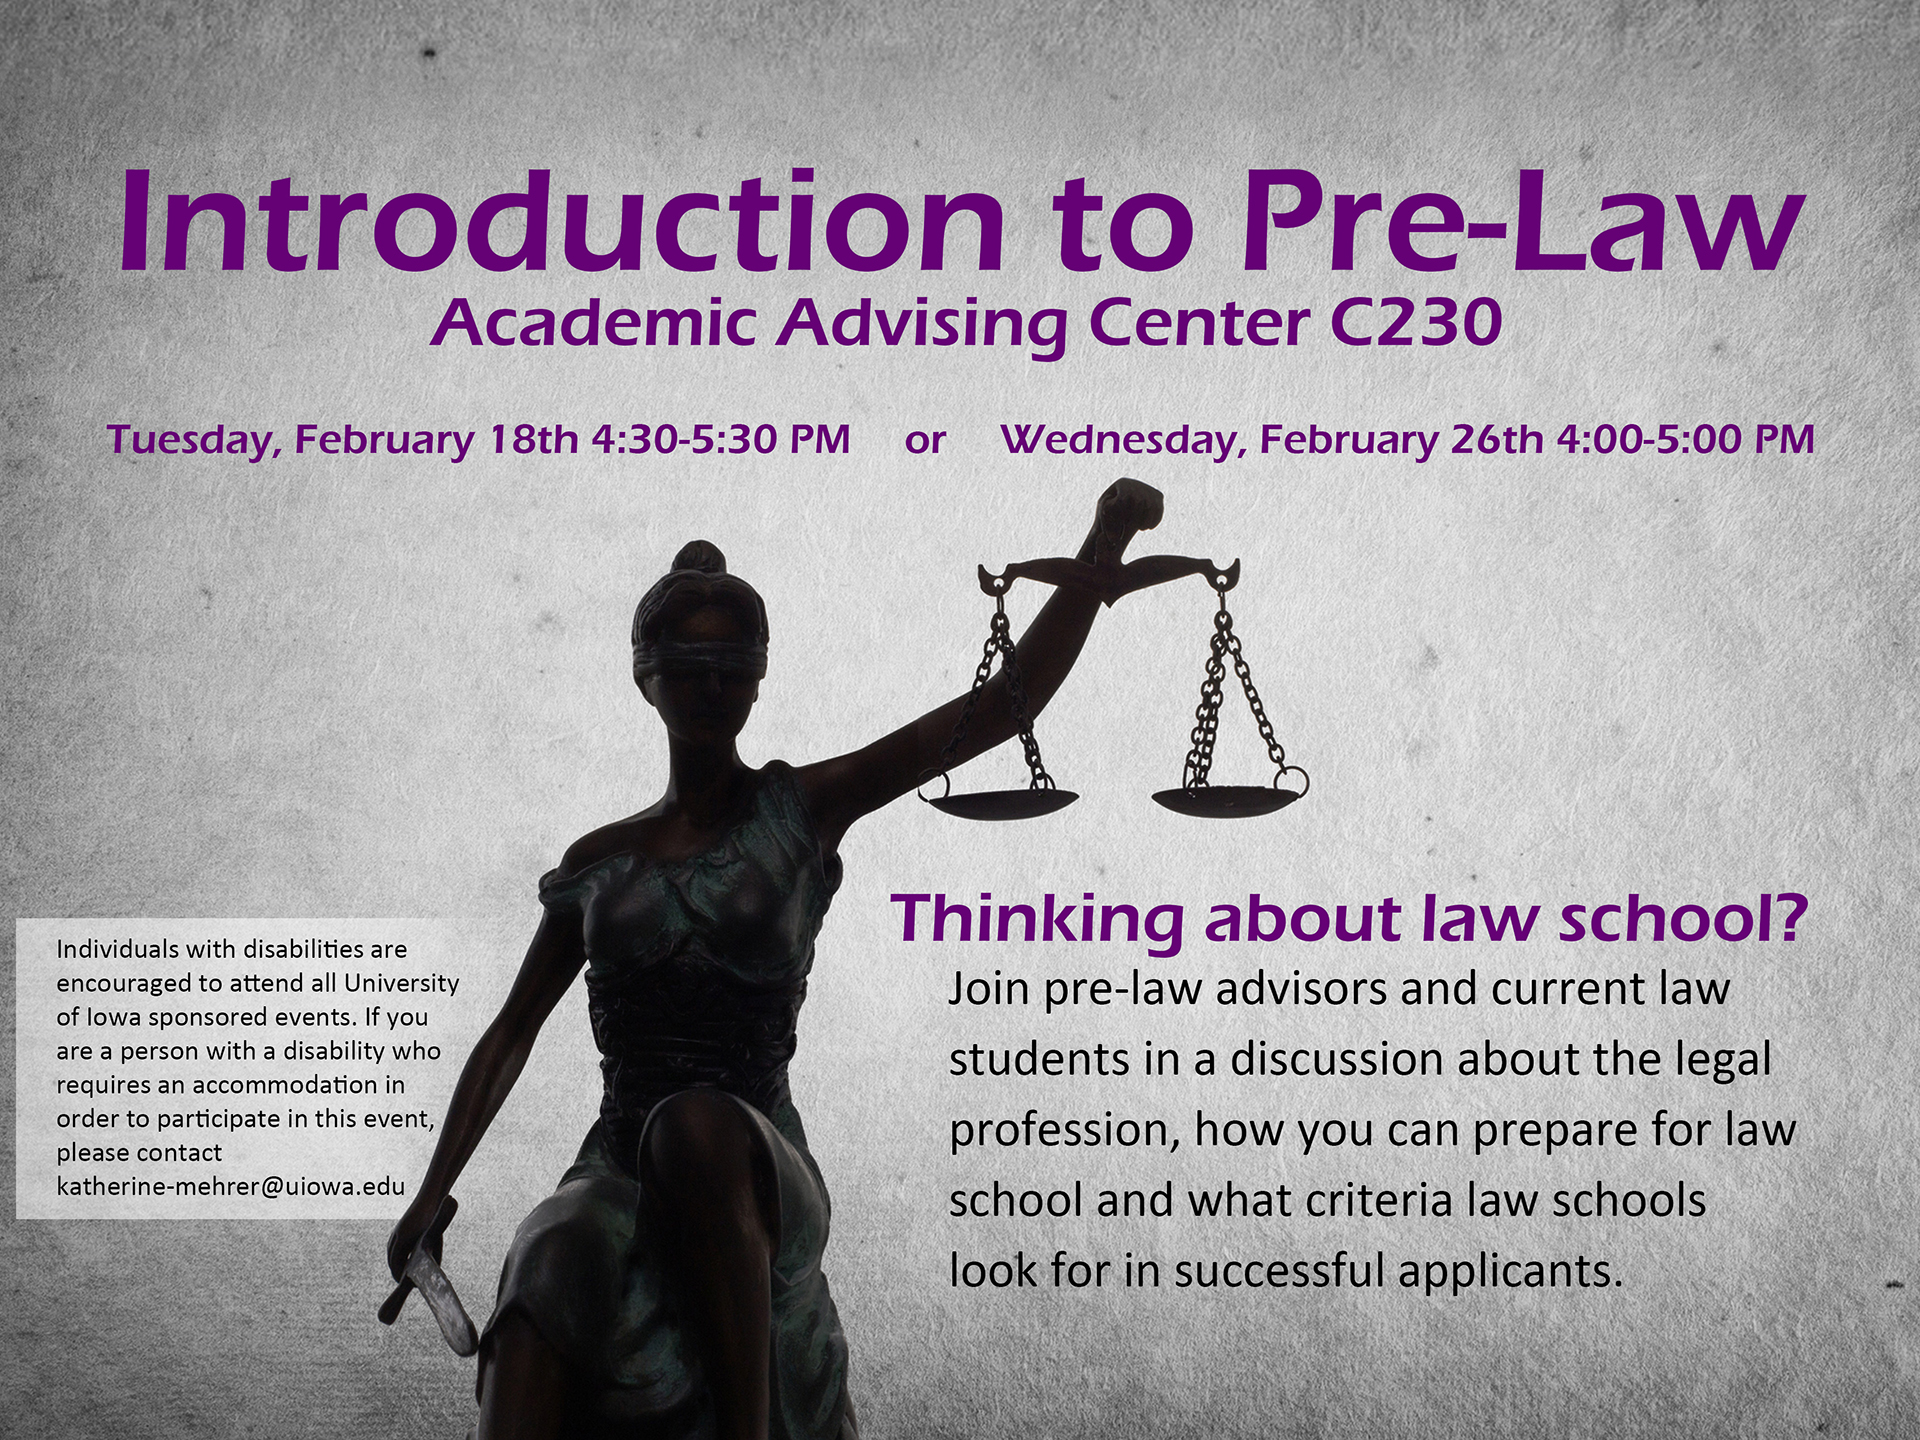 Introduction to Pre-Law